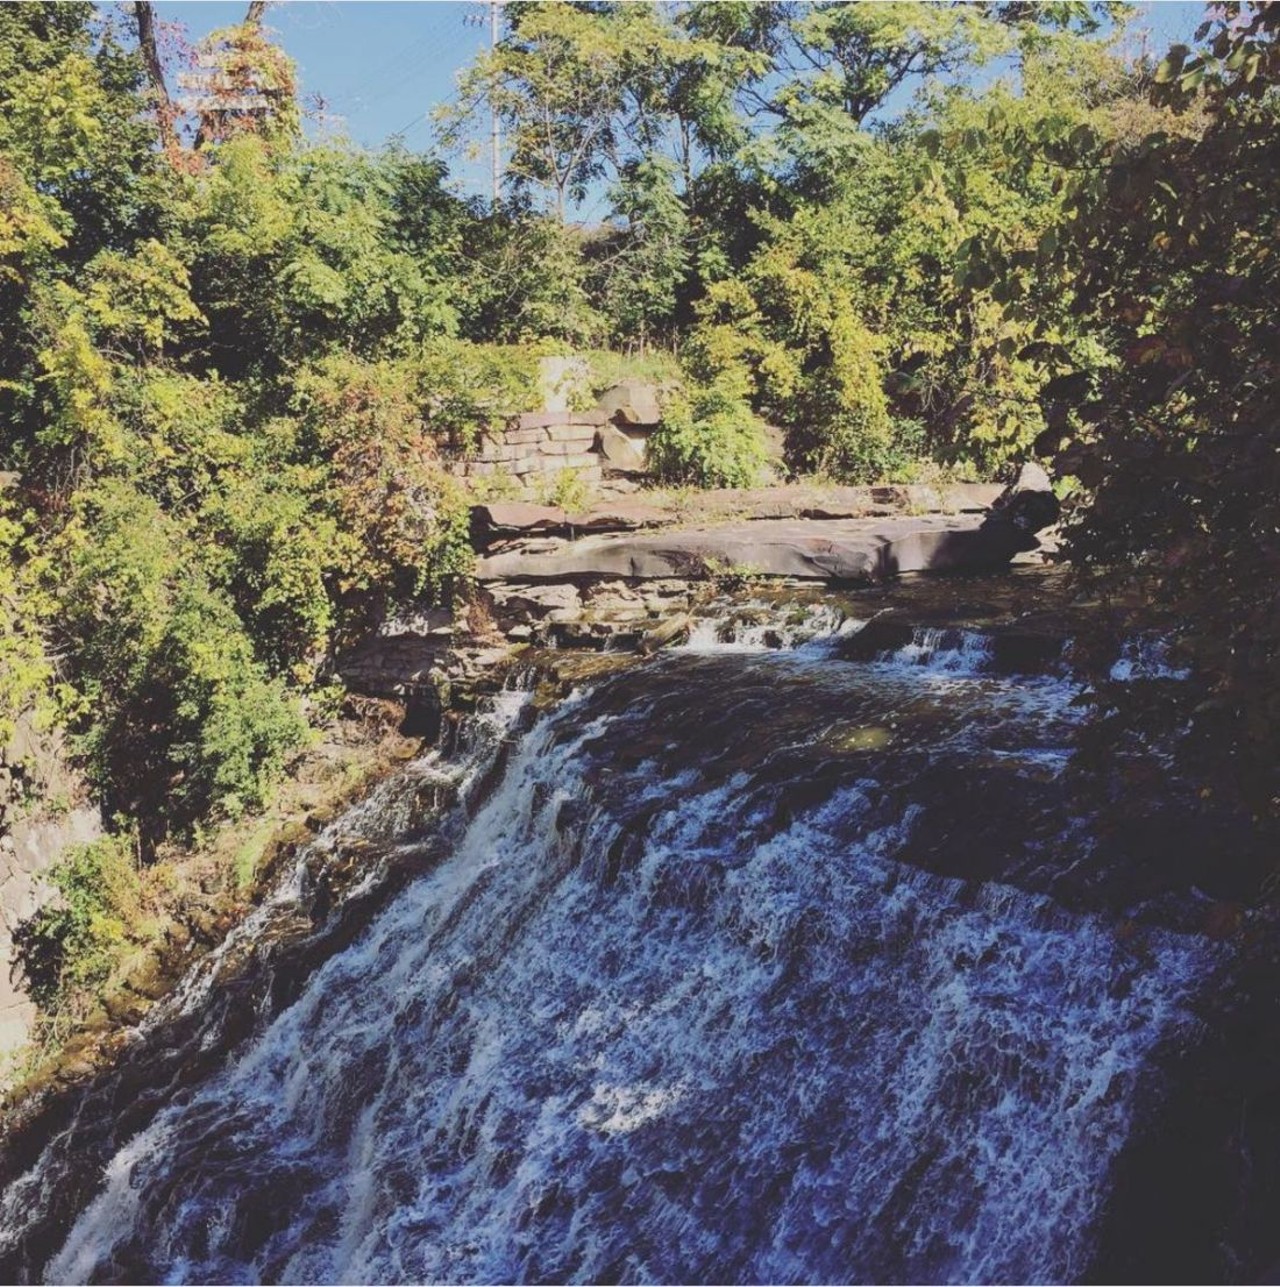 Mill Creek Falls
717-881-6473,  Mill Creek Trail
The falls are the largest in Cuyahoga County, running 48-feet deep.
Photo via kris_edels/Instagram